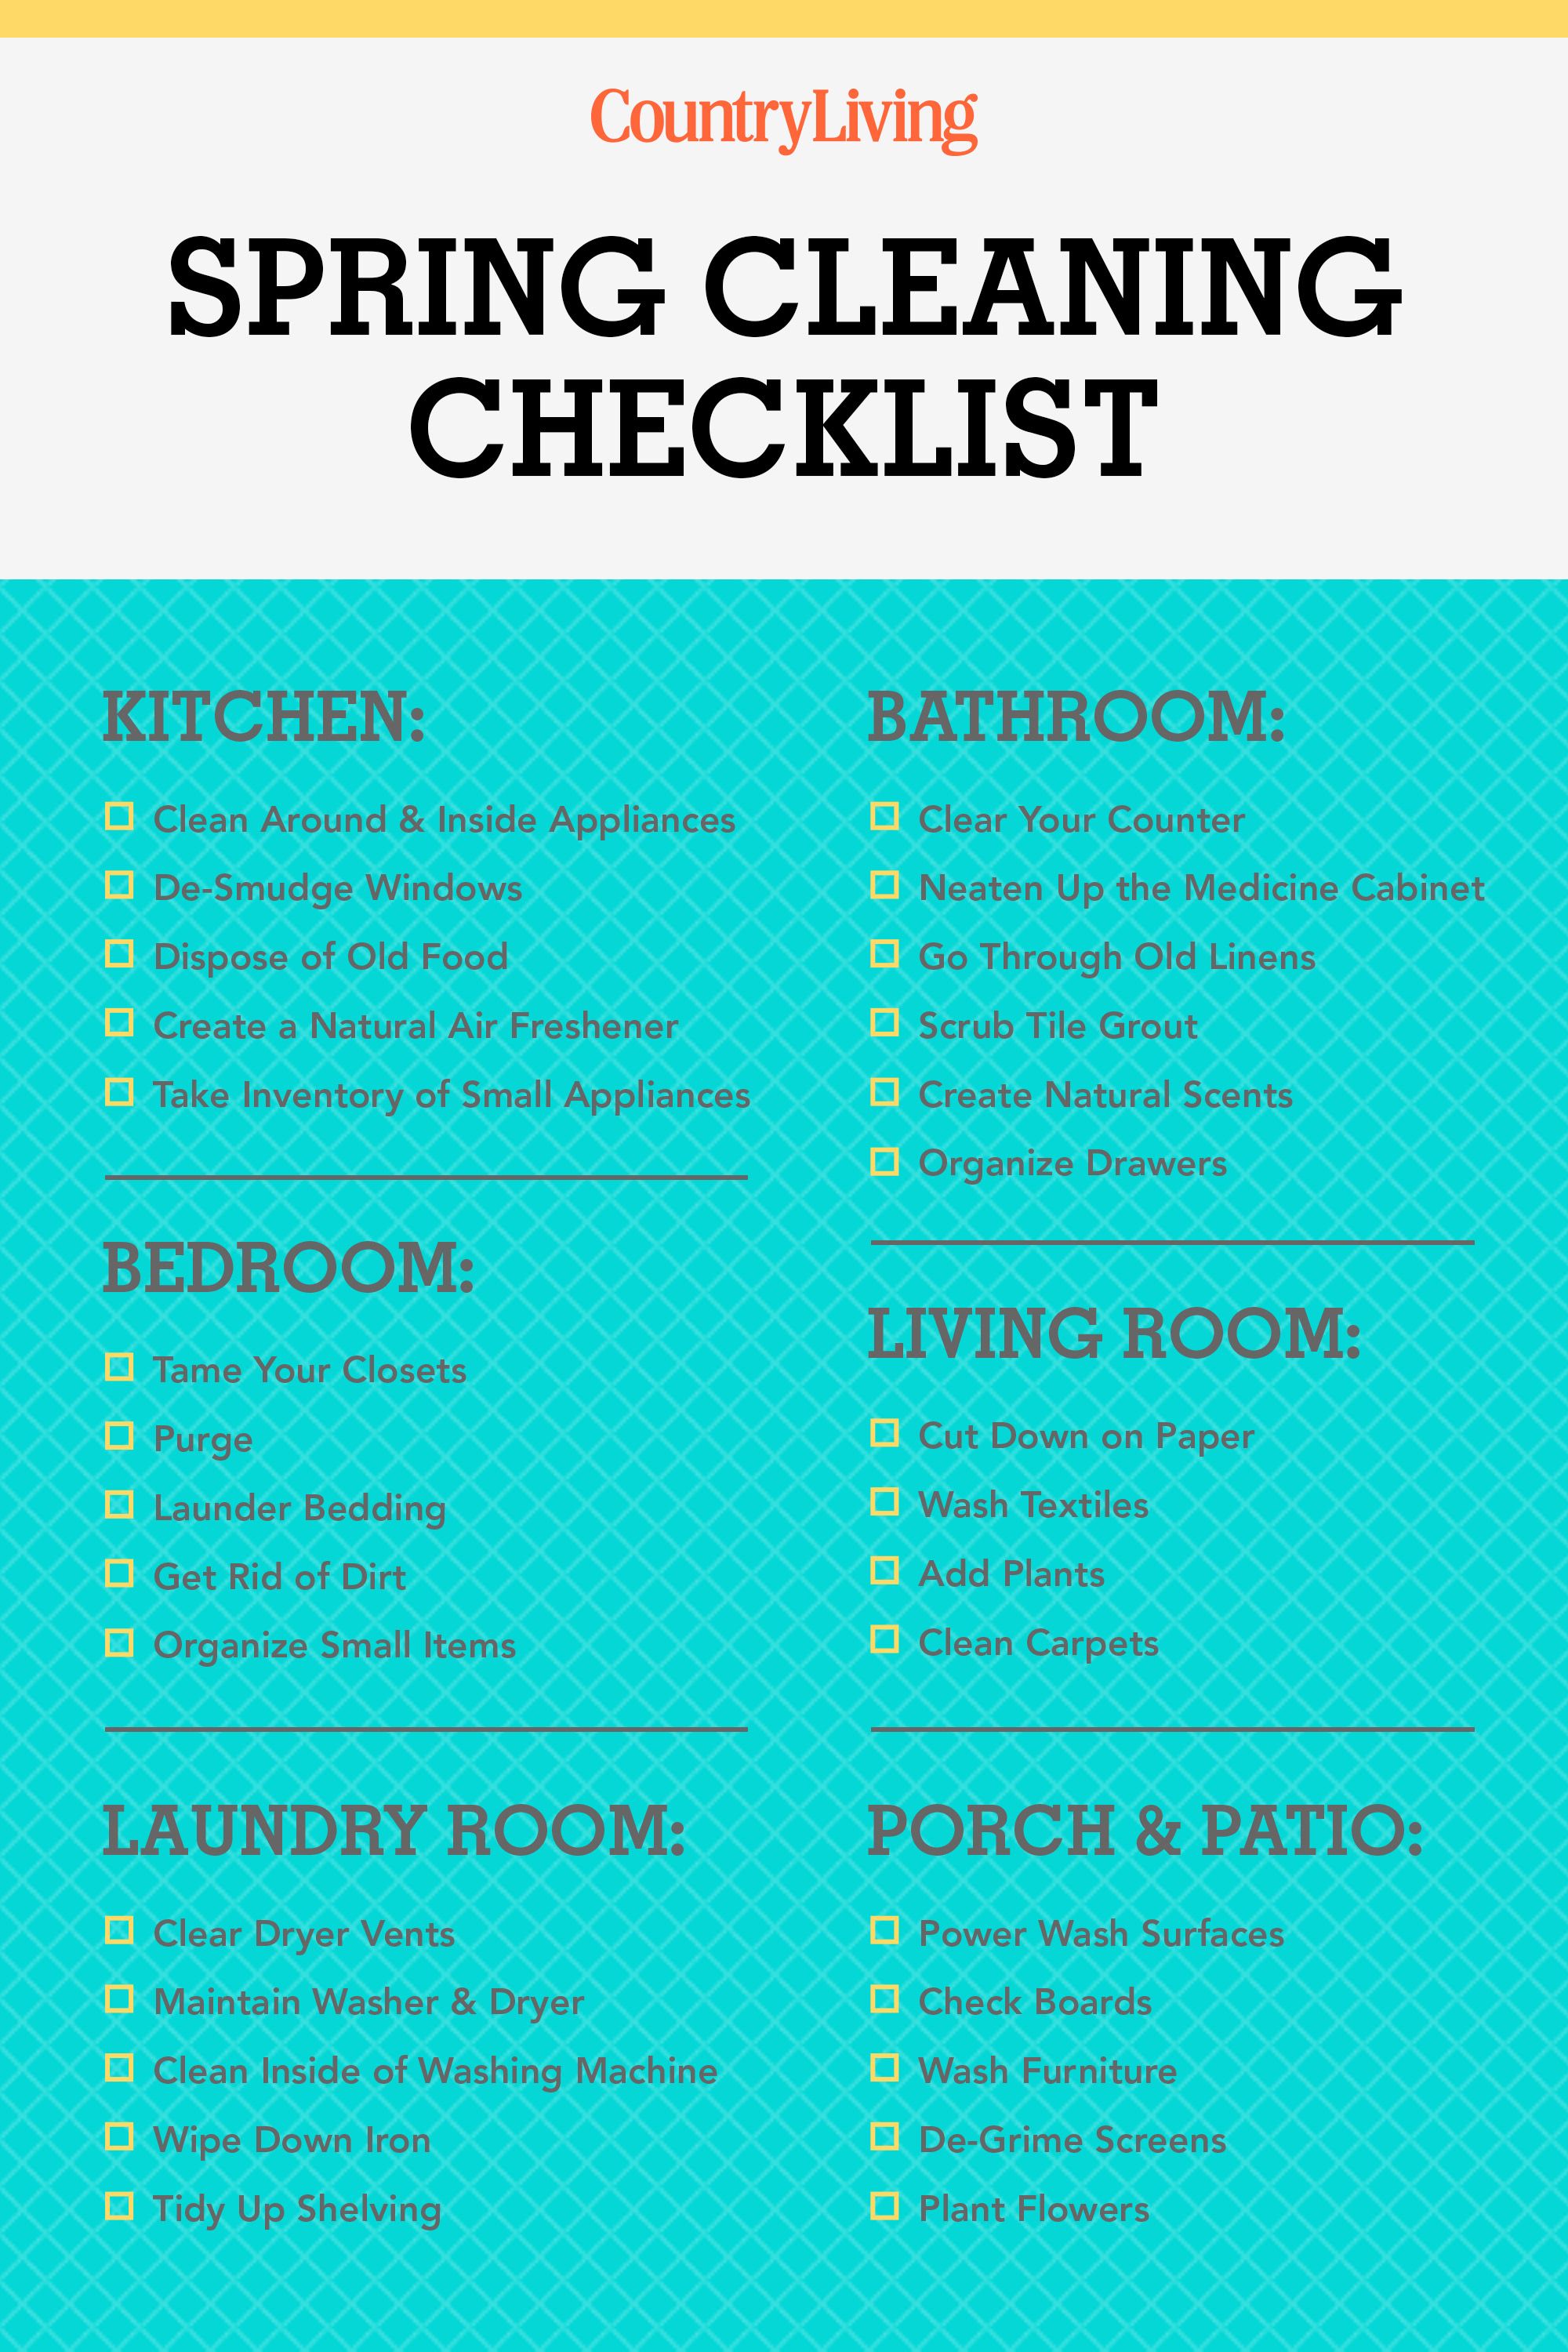 Your Ultimate Spring-Cleaning Checklist